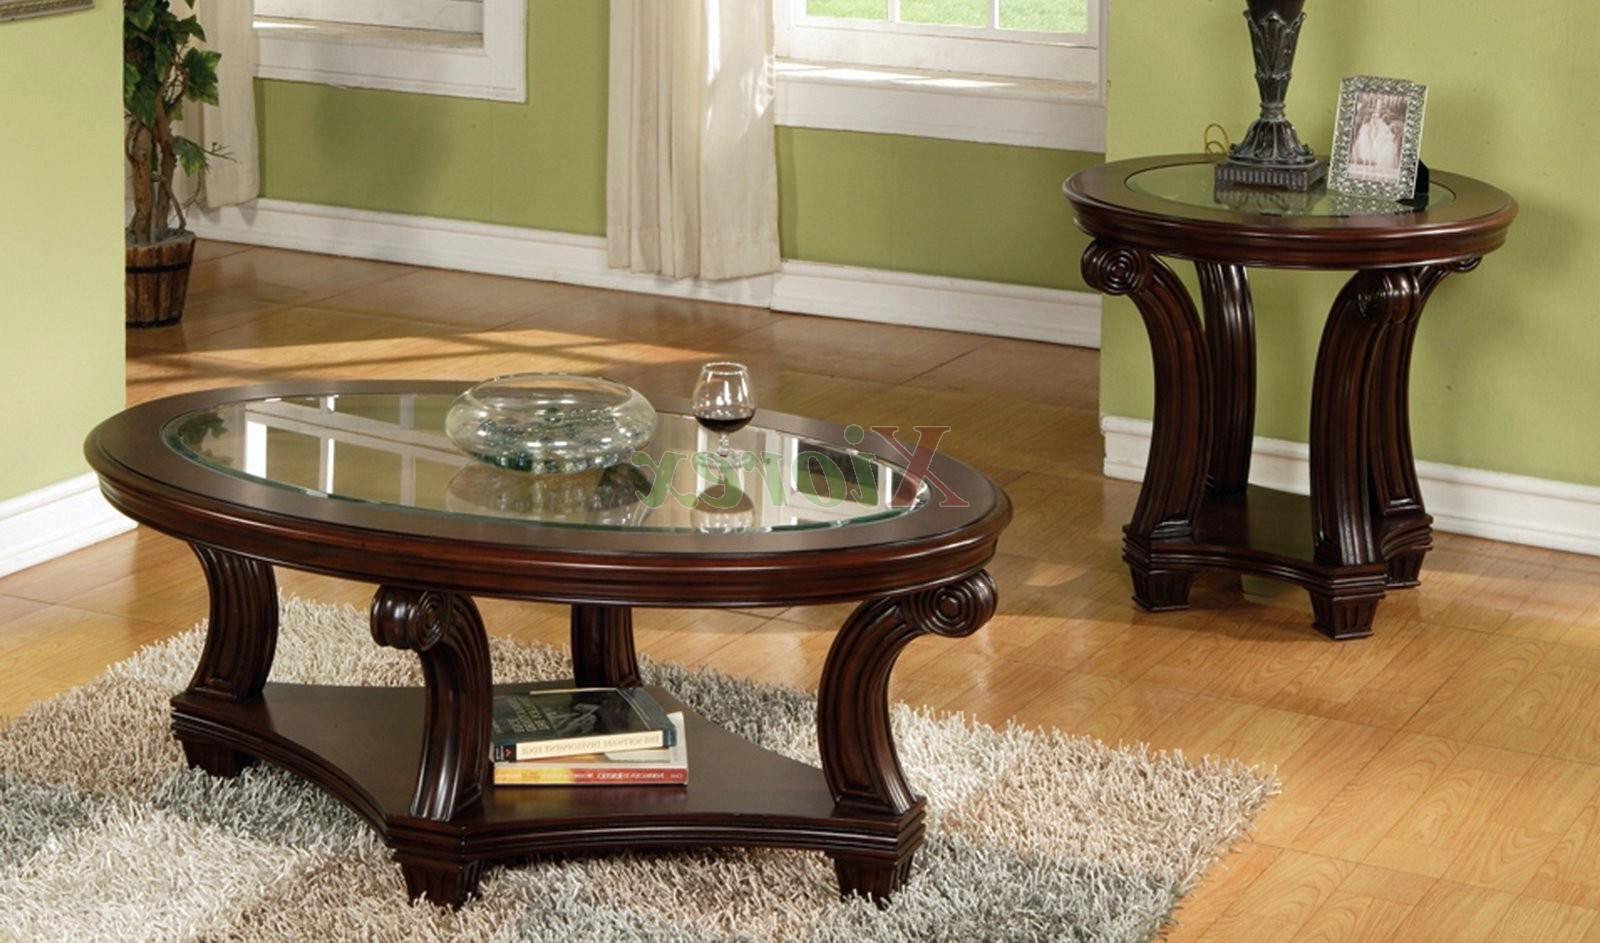 Oval Coffee Table Sets Decorating Ideas | Roy Home Design